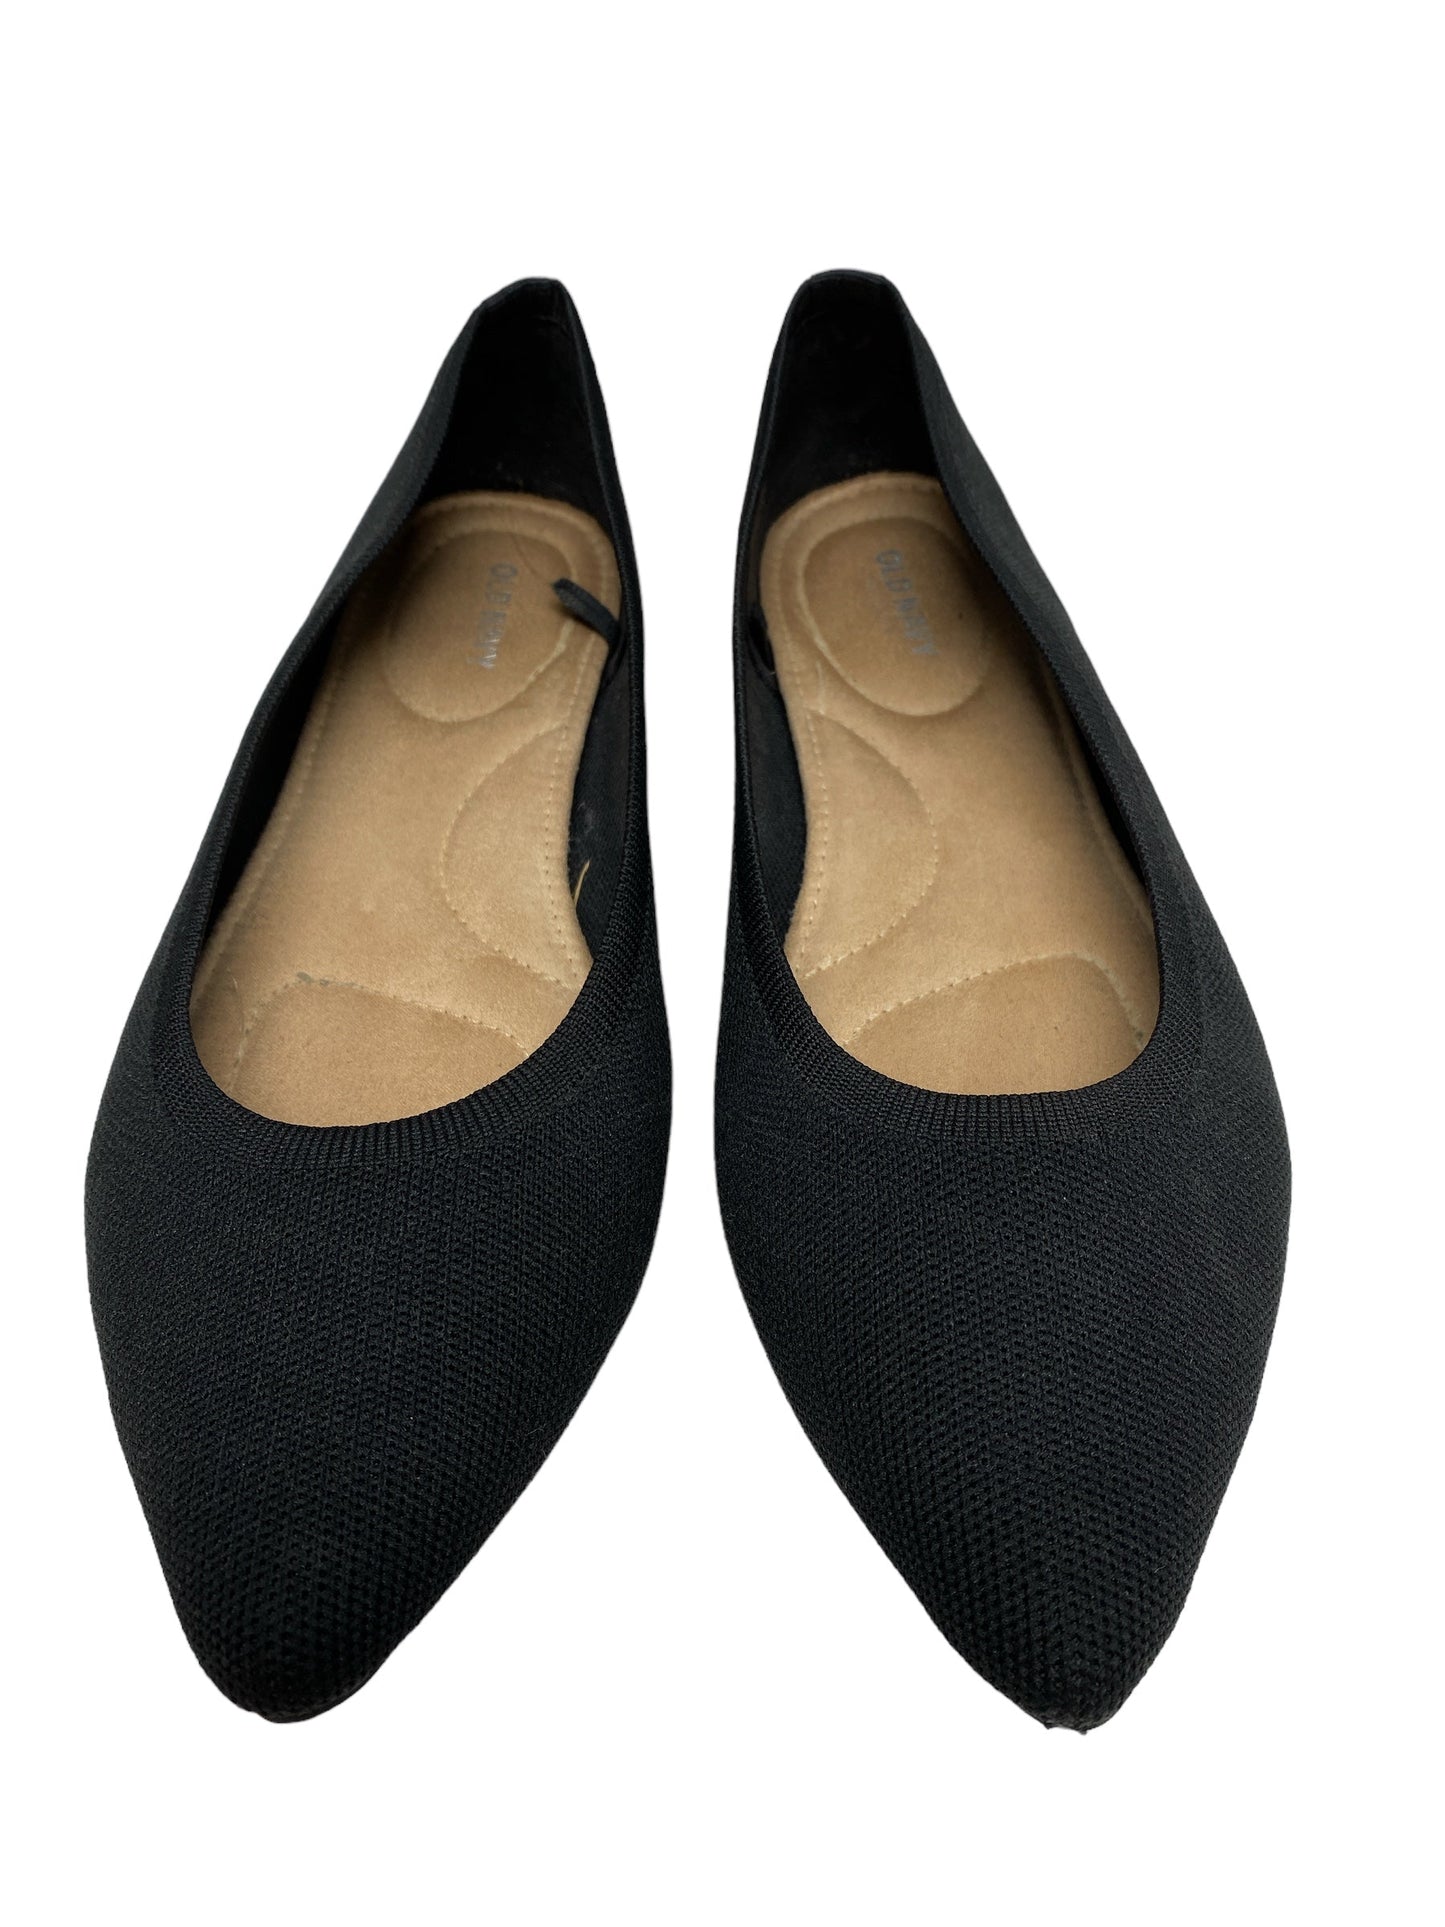 Black Shoes Flats Old Navy, Size 9